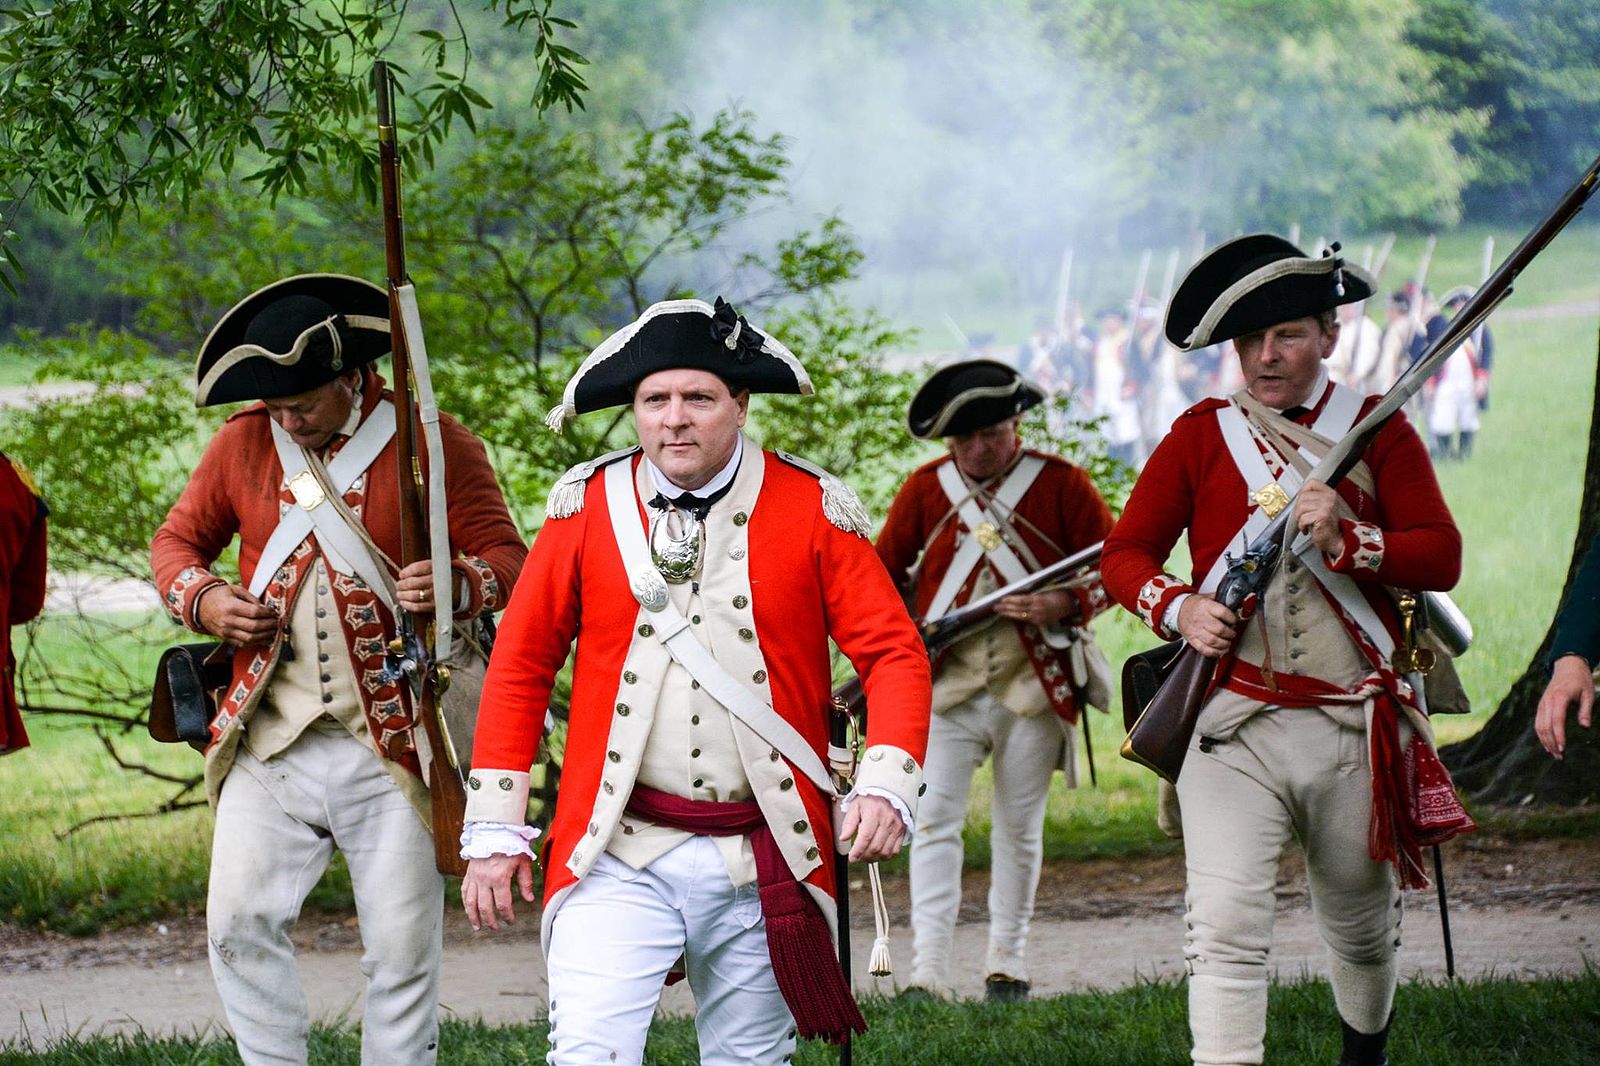 4 tactical blunders the British made in the Revolutionary War